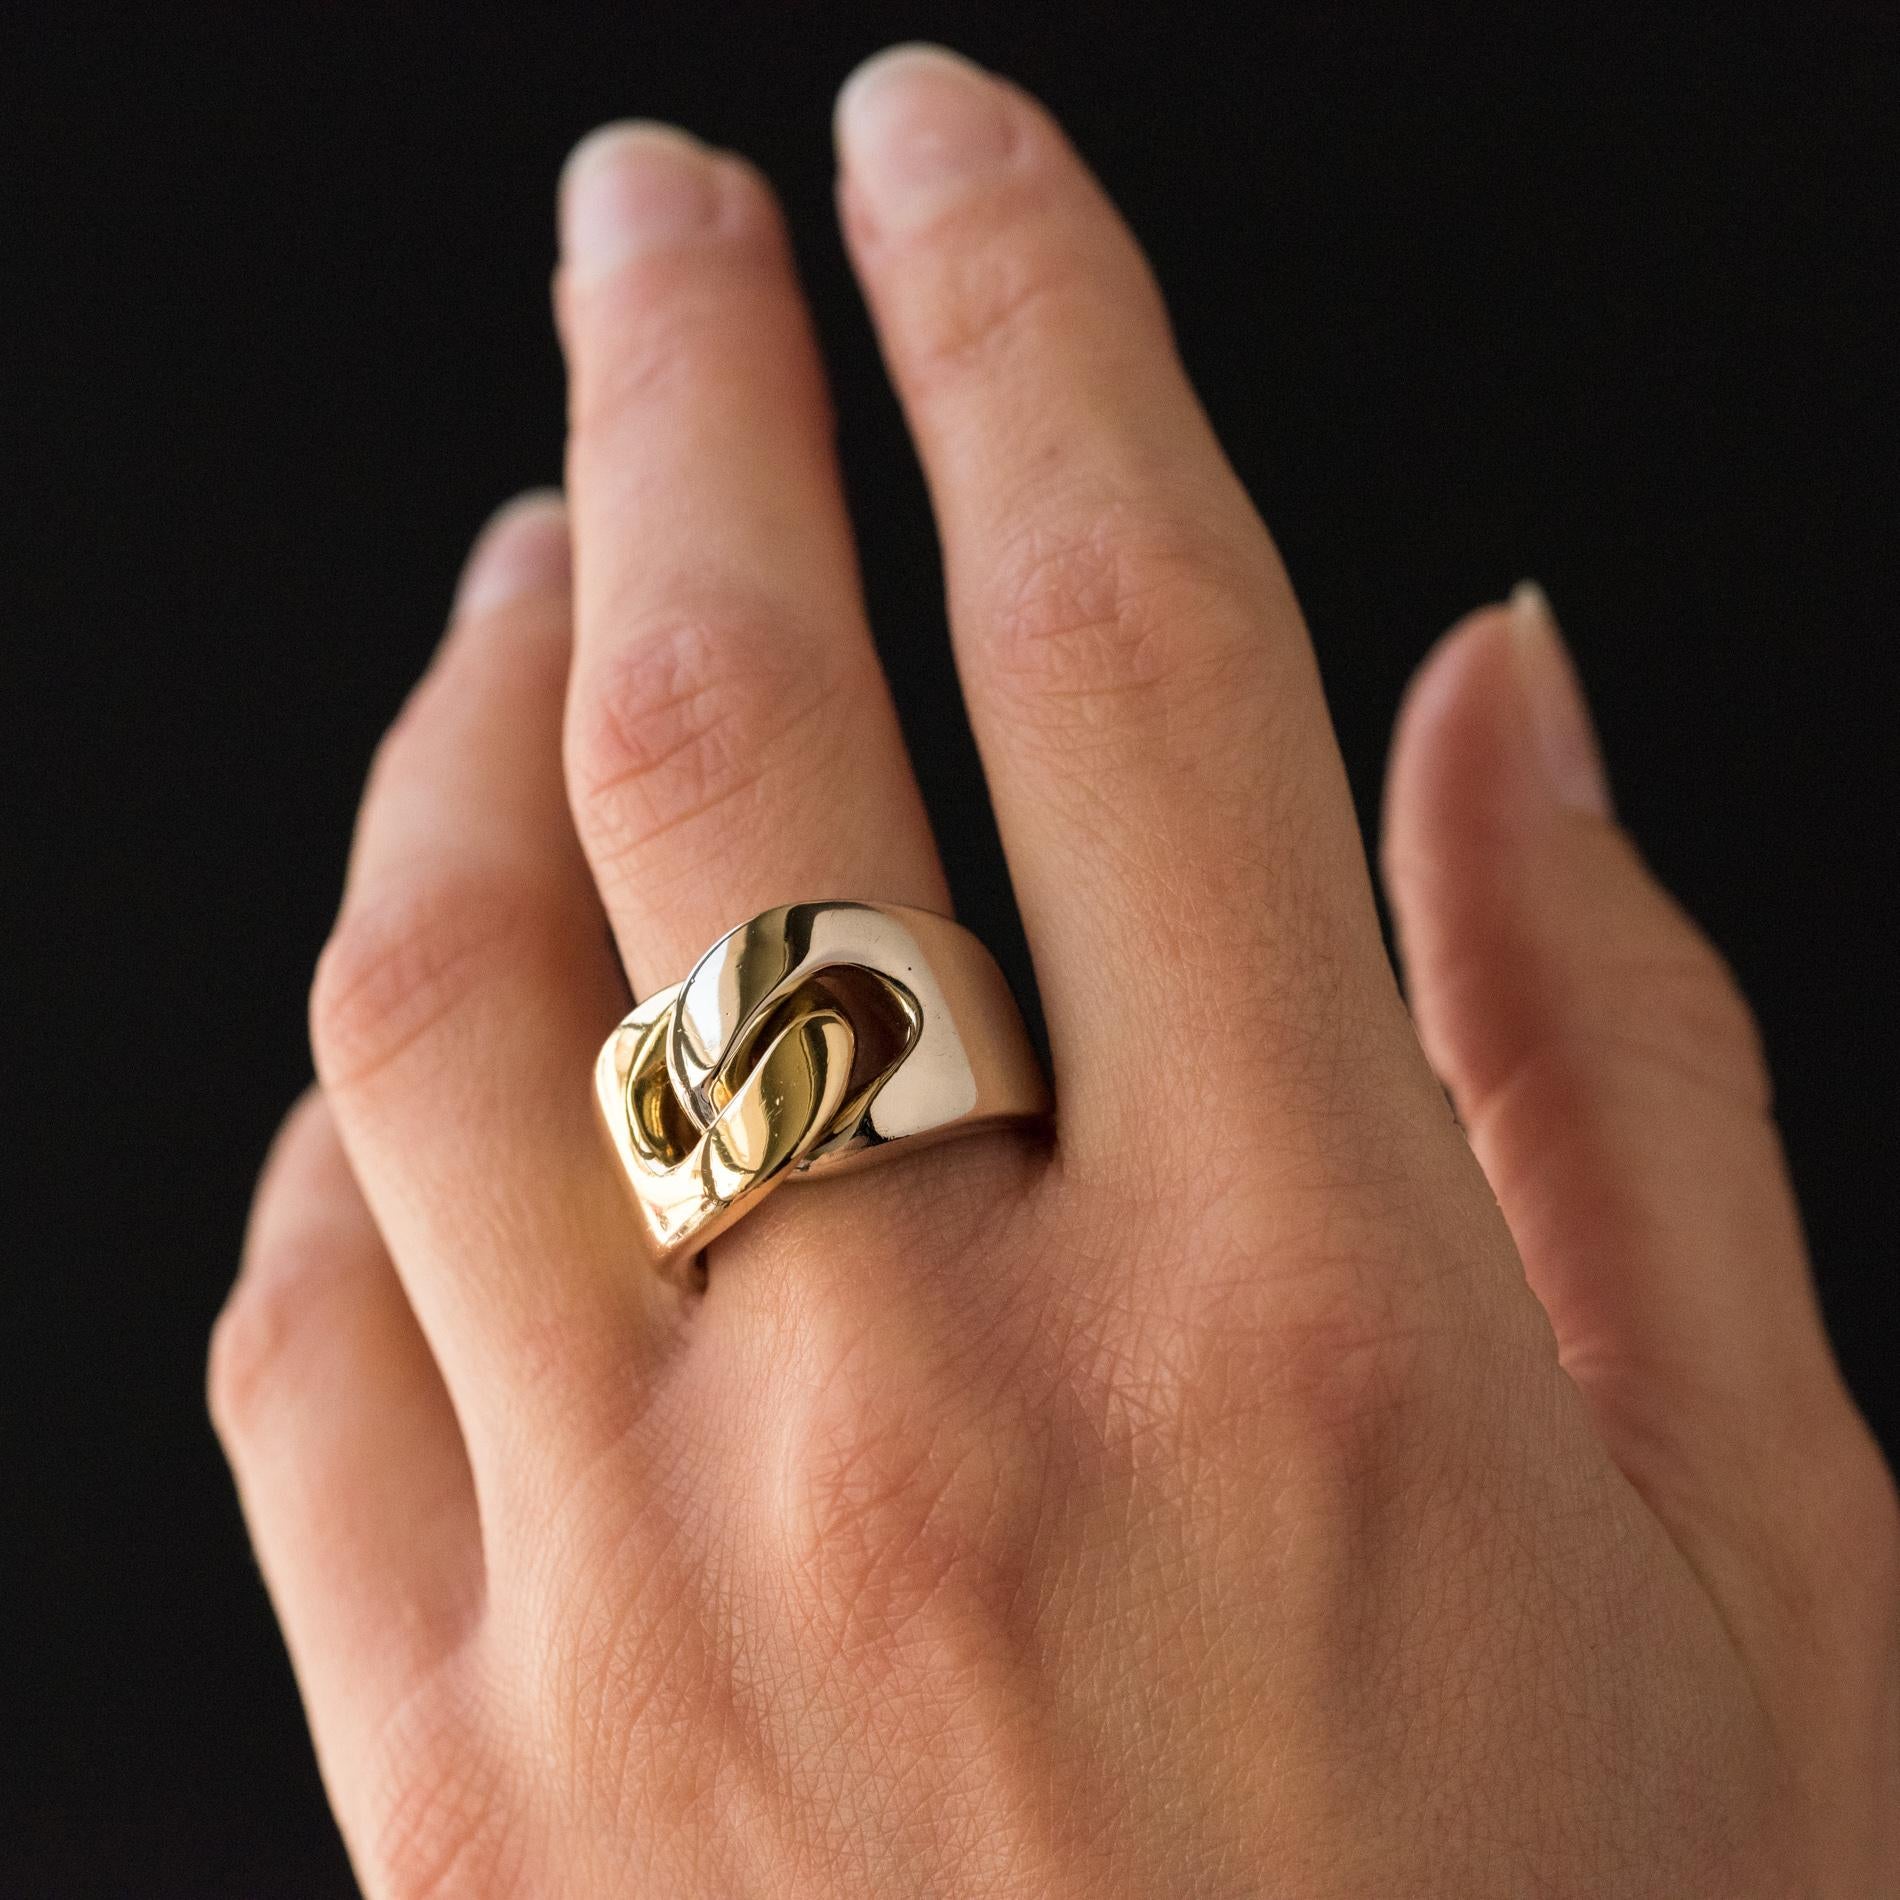 Ring in 18 karats yellow gold and white gold.
Signed Pomellato, this massive ring is composed of 2 rings that meet on the top and intertwine such a curb motif.
Height: 1.4 cm, thickness: 0.5 cm.
Width of the ring at the base: 0.7 cm.
Total weight of